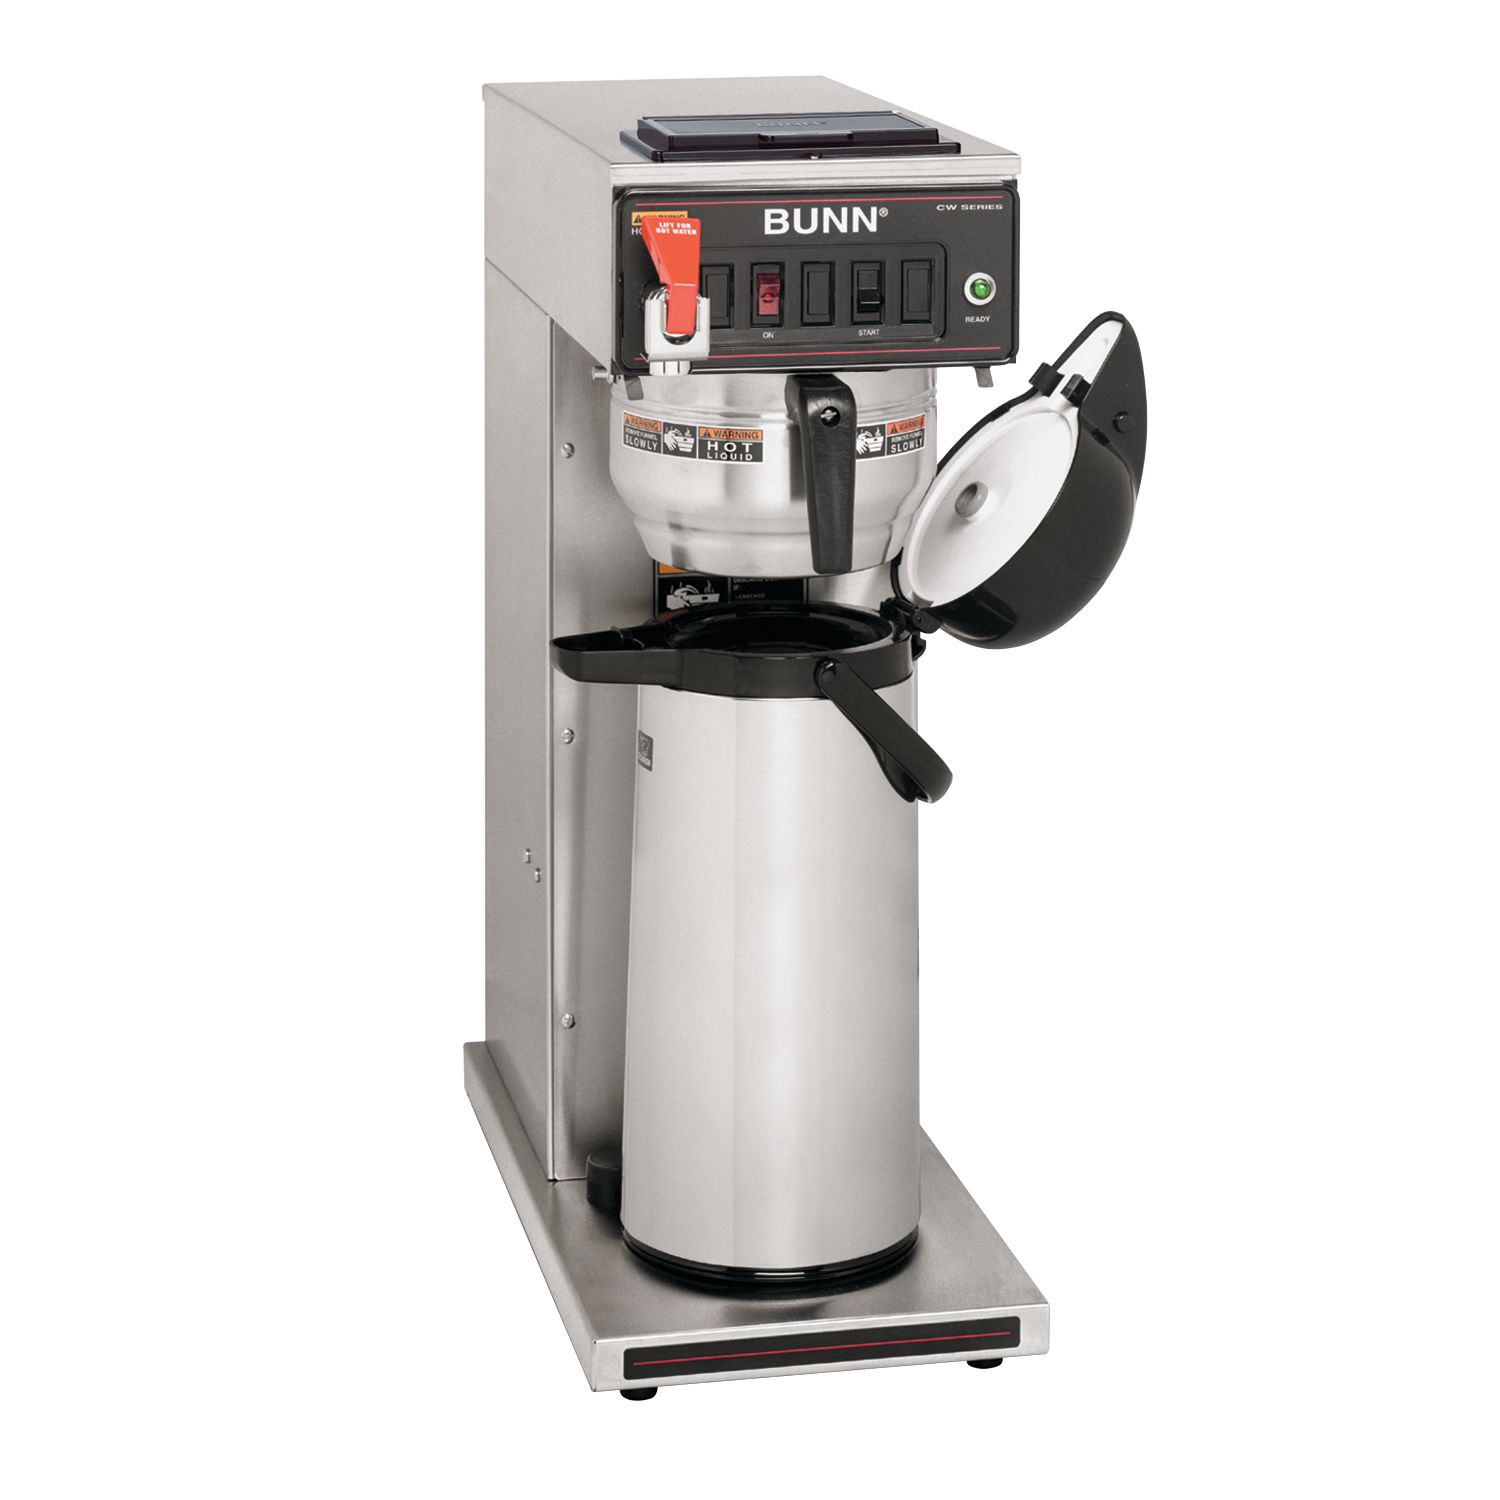 Bunn Stainless Steel CW Series Commercial Coffee Maker Airpot